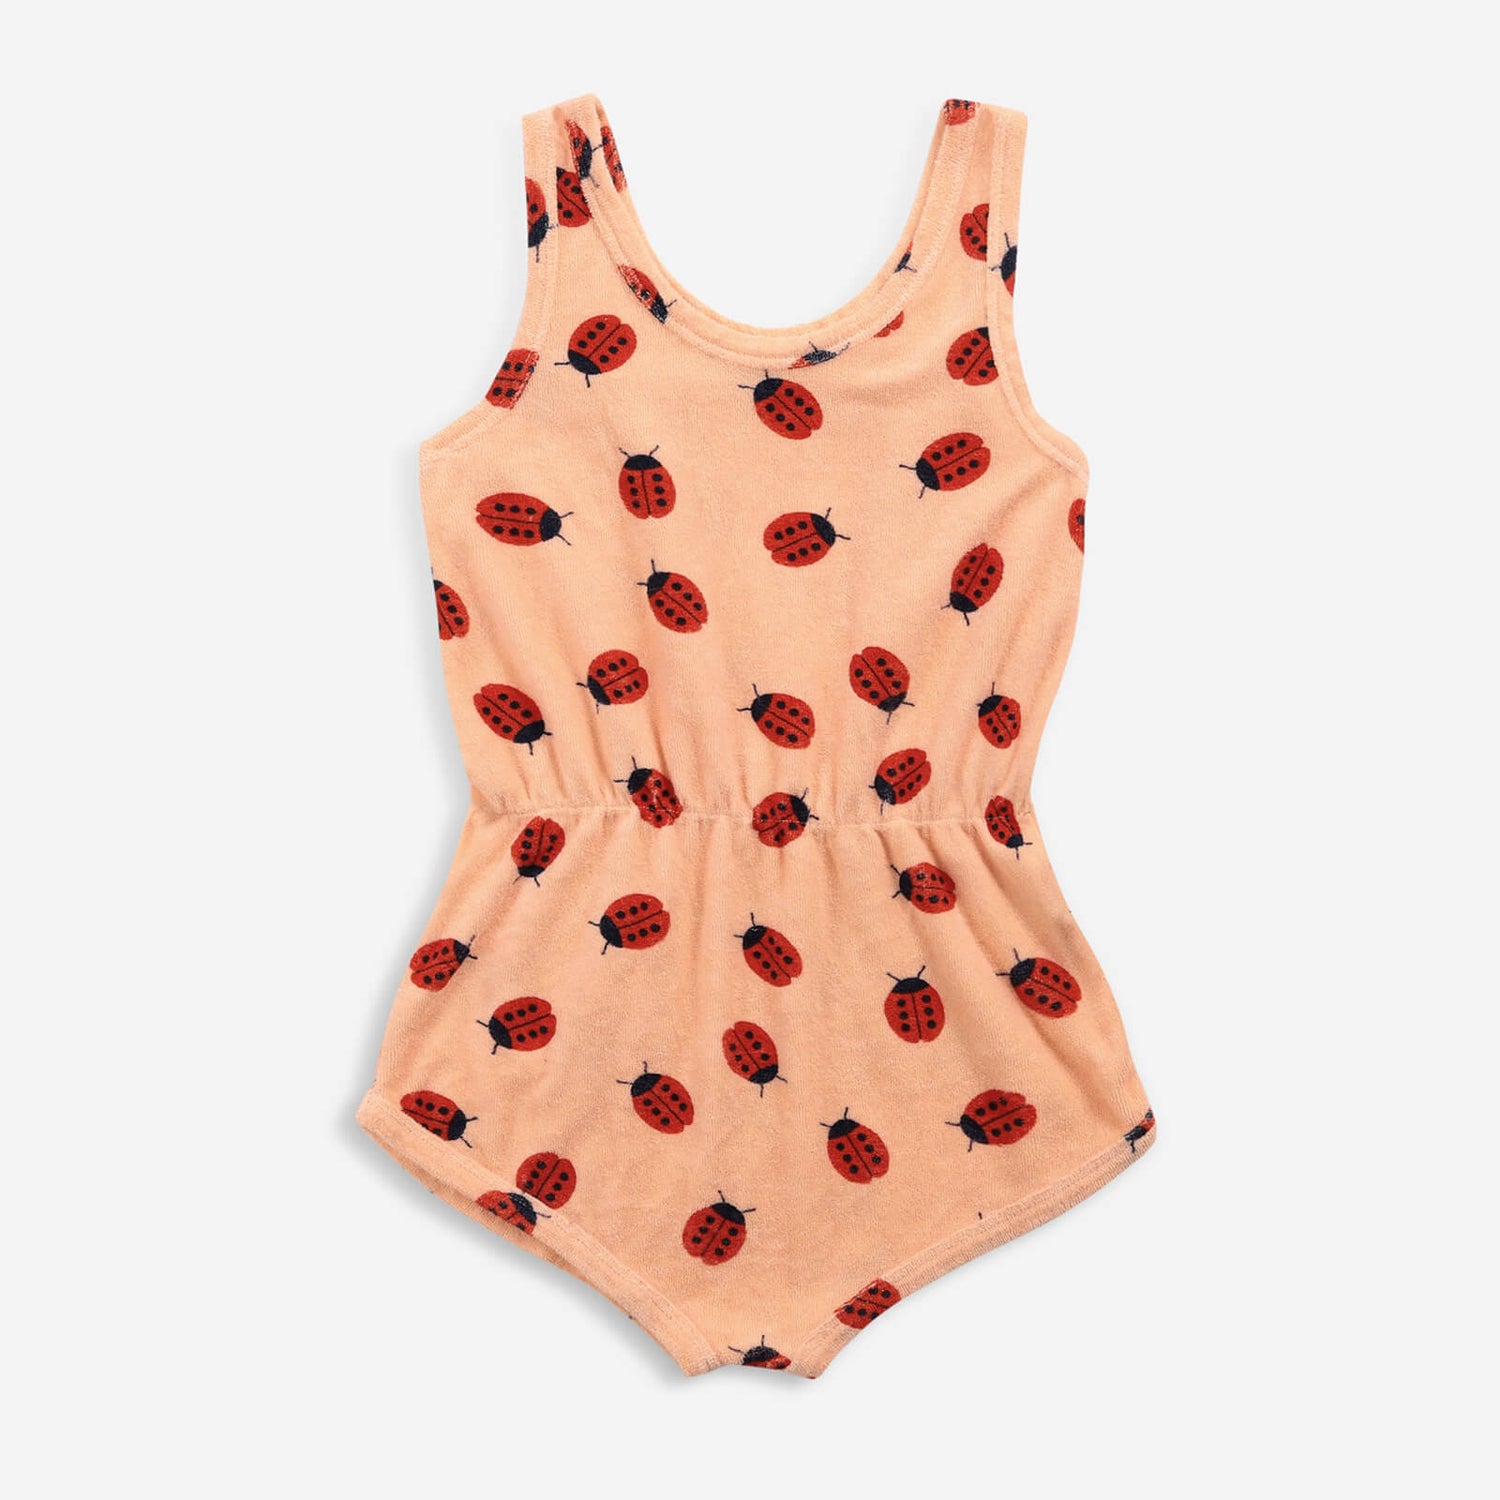 Bobo Choses Ladybug All Over Terry Playsuit - 2-3 years